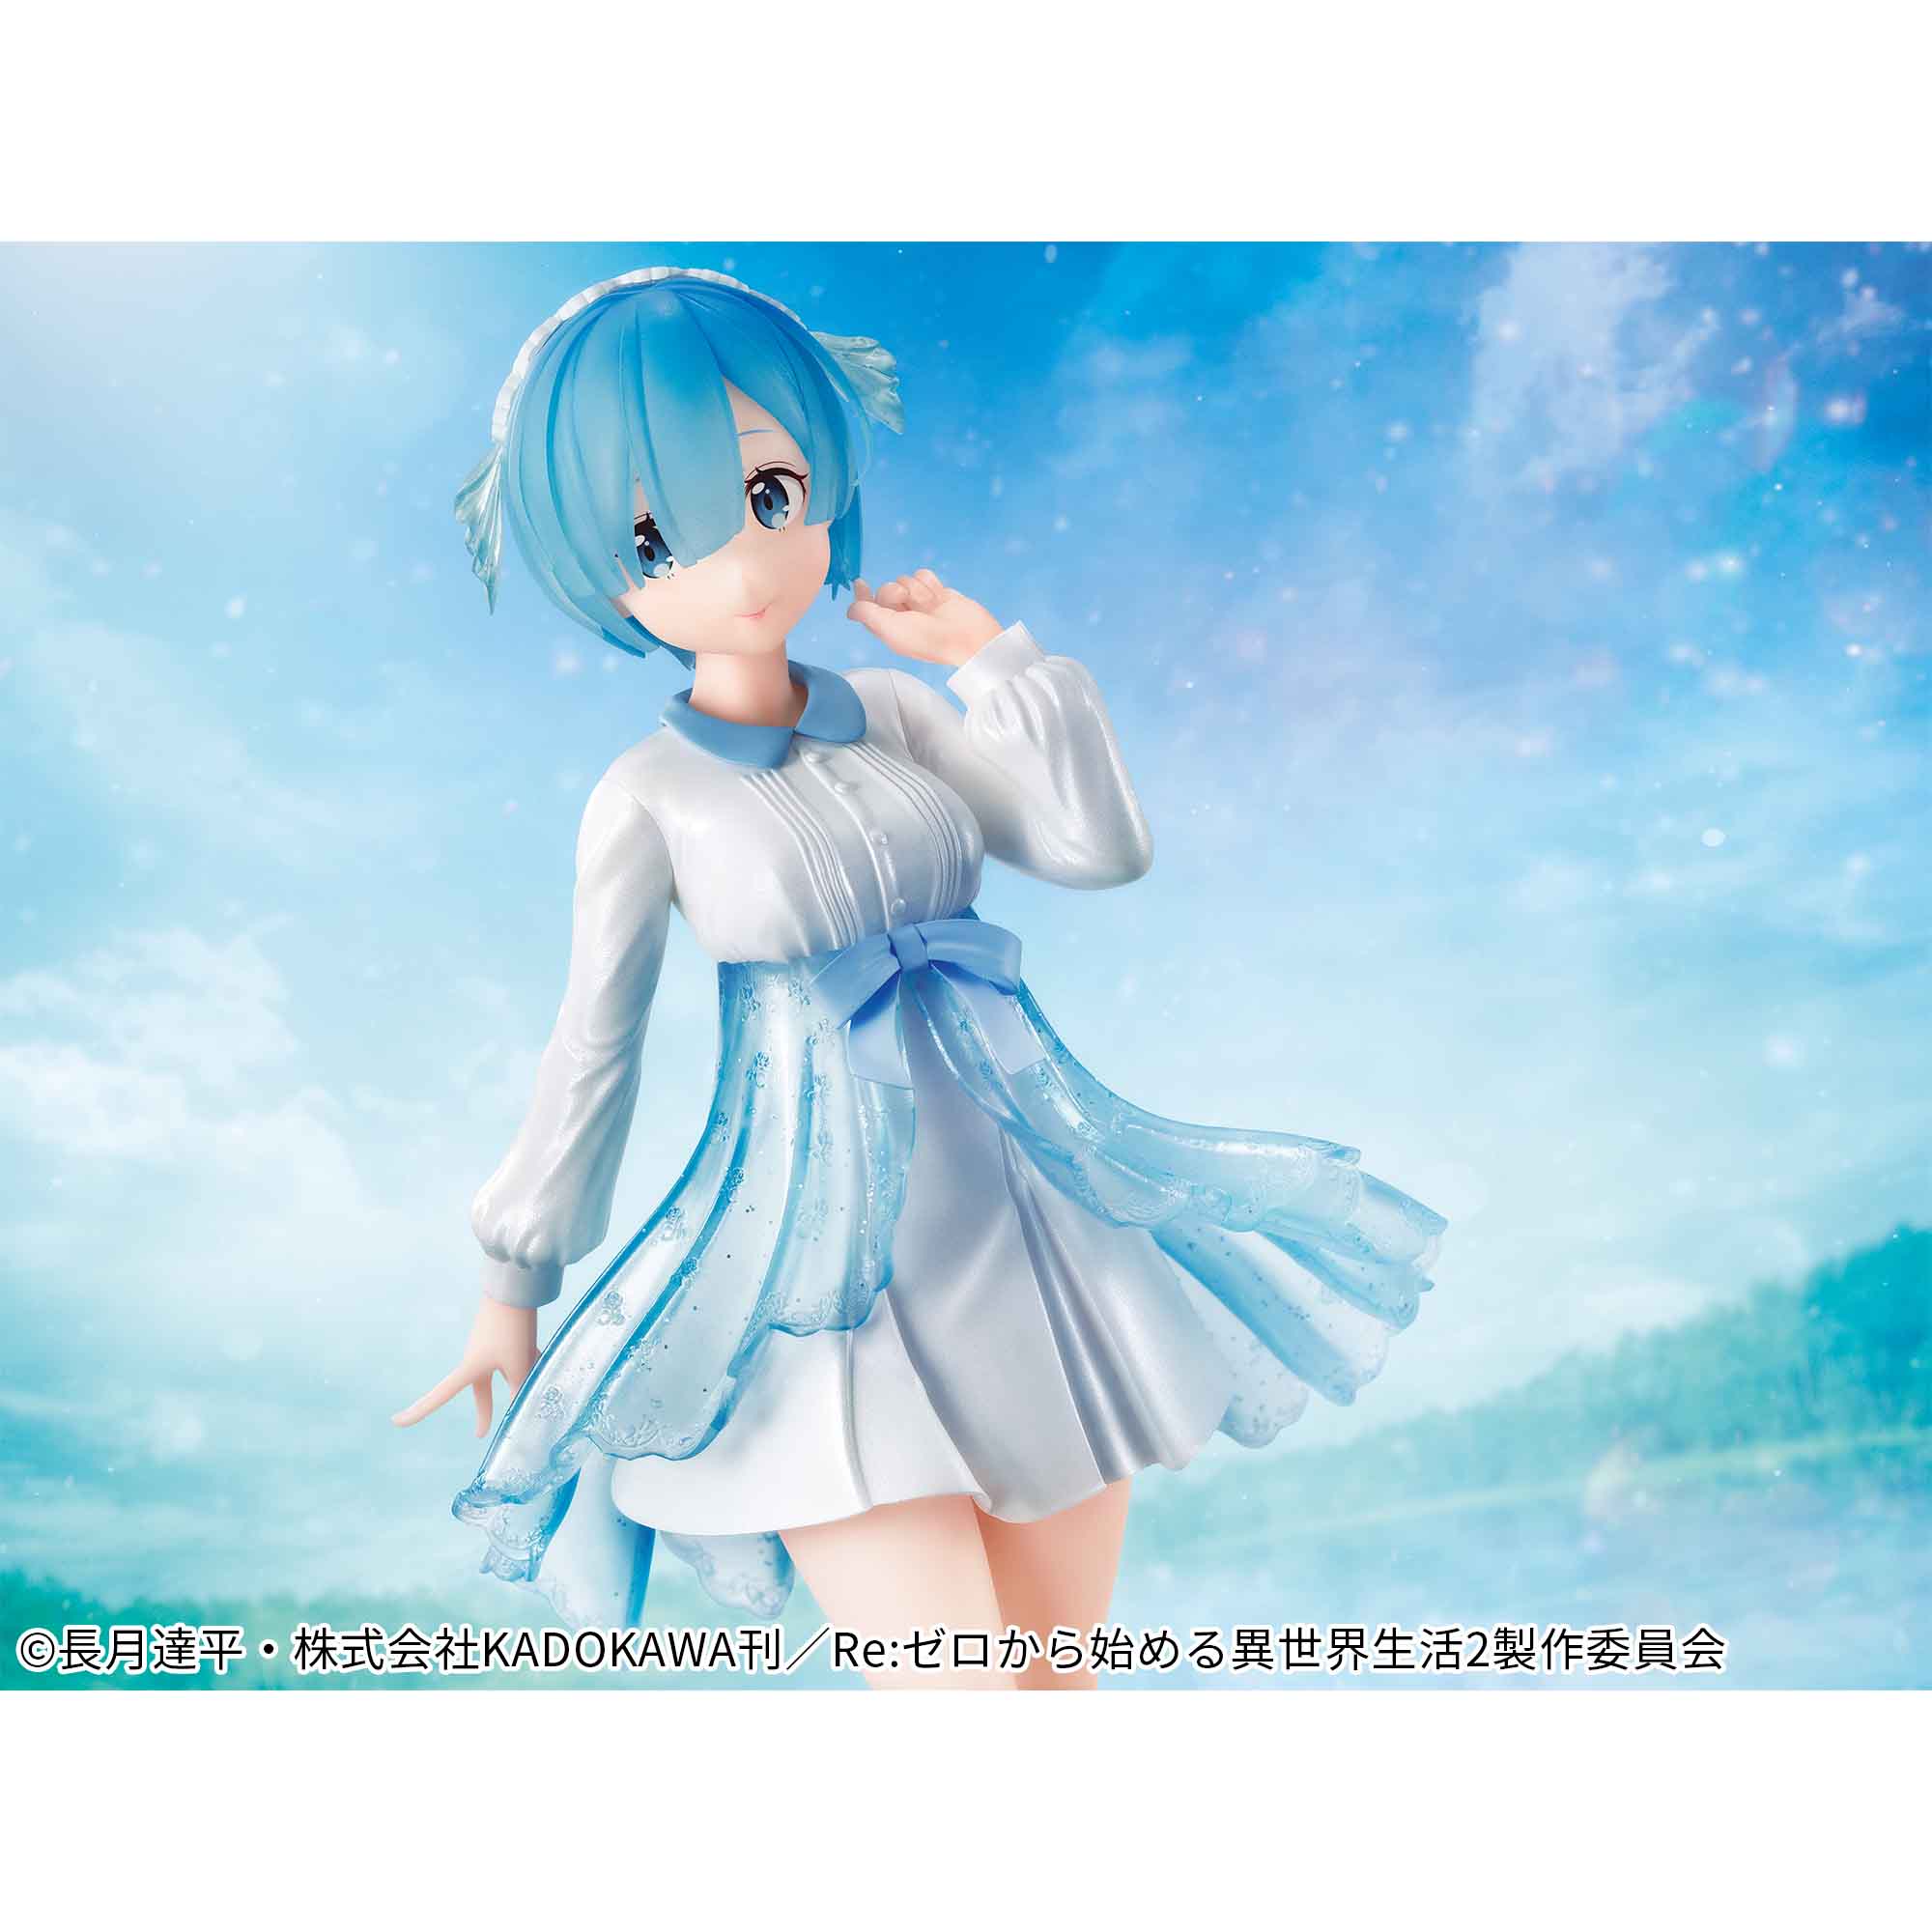 Re:Zero - Starting Life in Another World - Serenus couture - Rem - vol.2